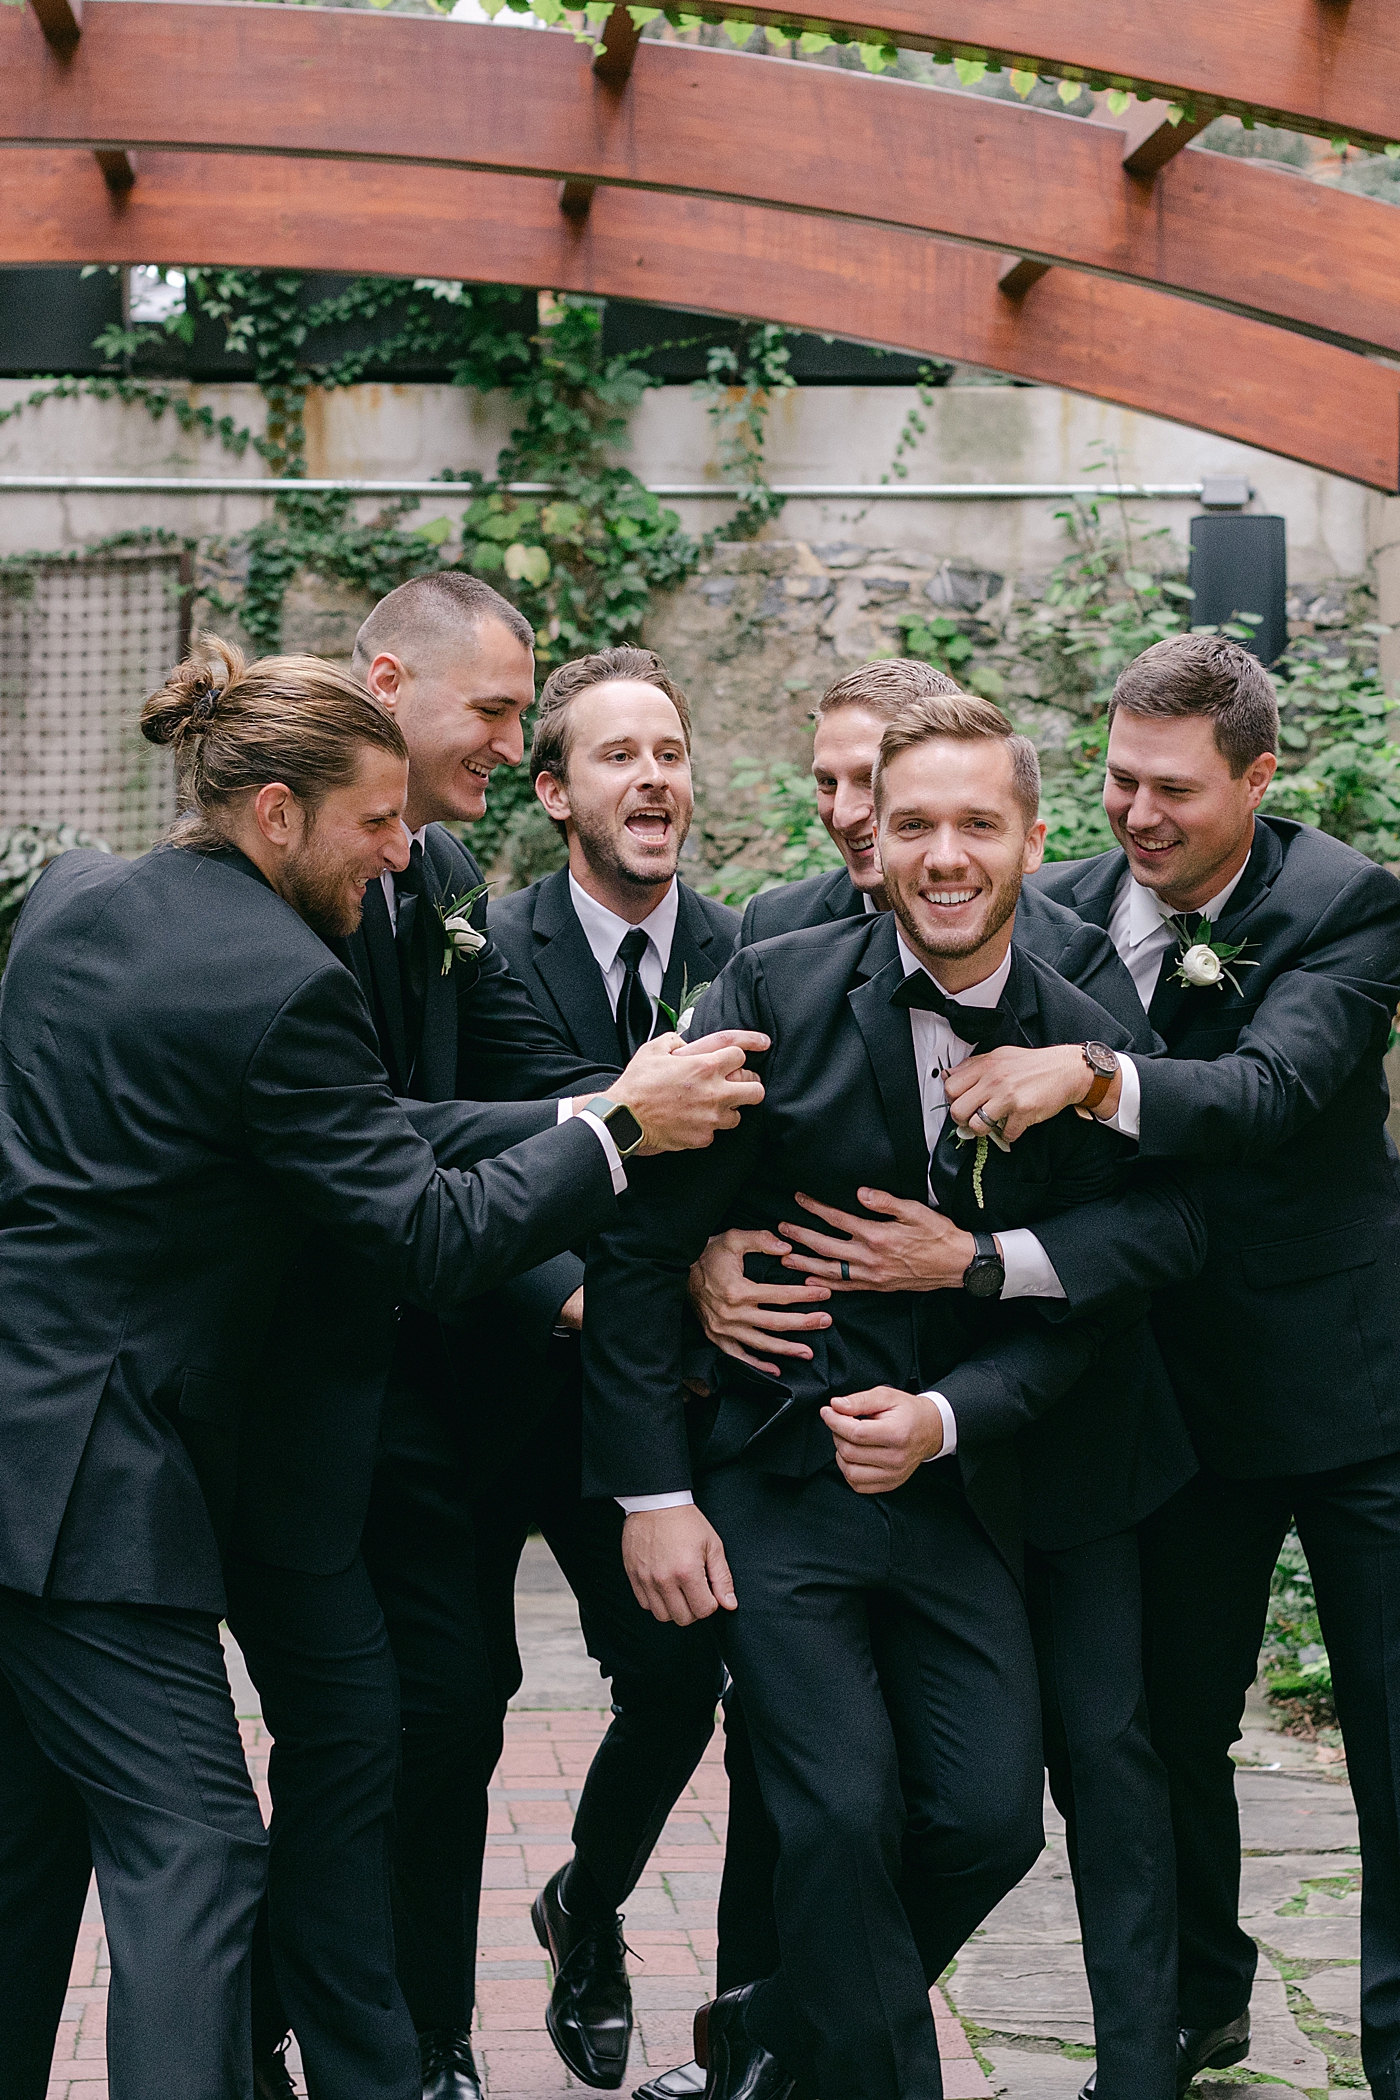 Groom and groomsmen laughing | Excelsior PA Wedding Photography by Hope Helmuth Photography